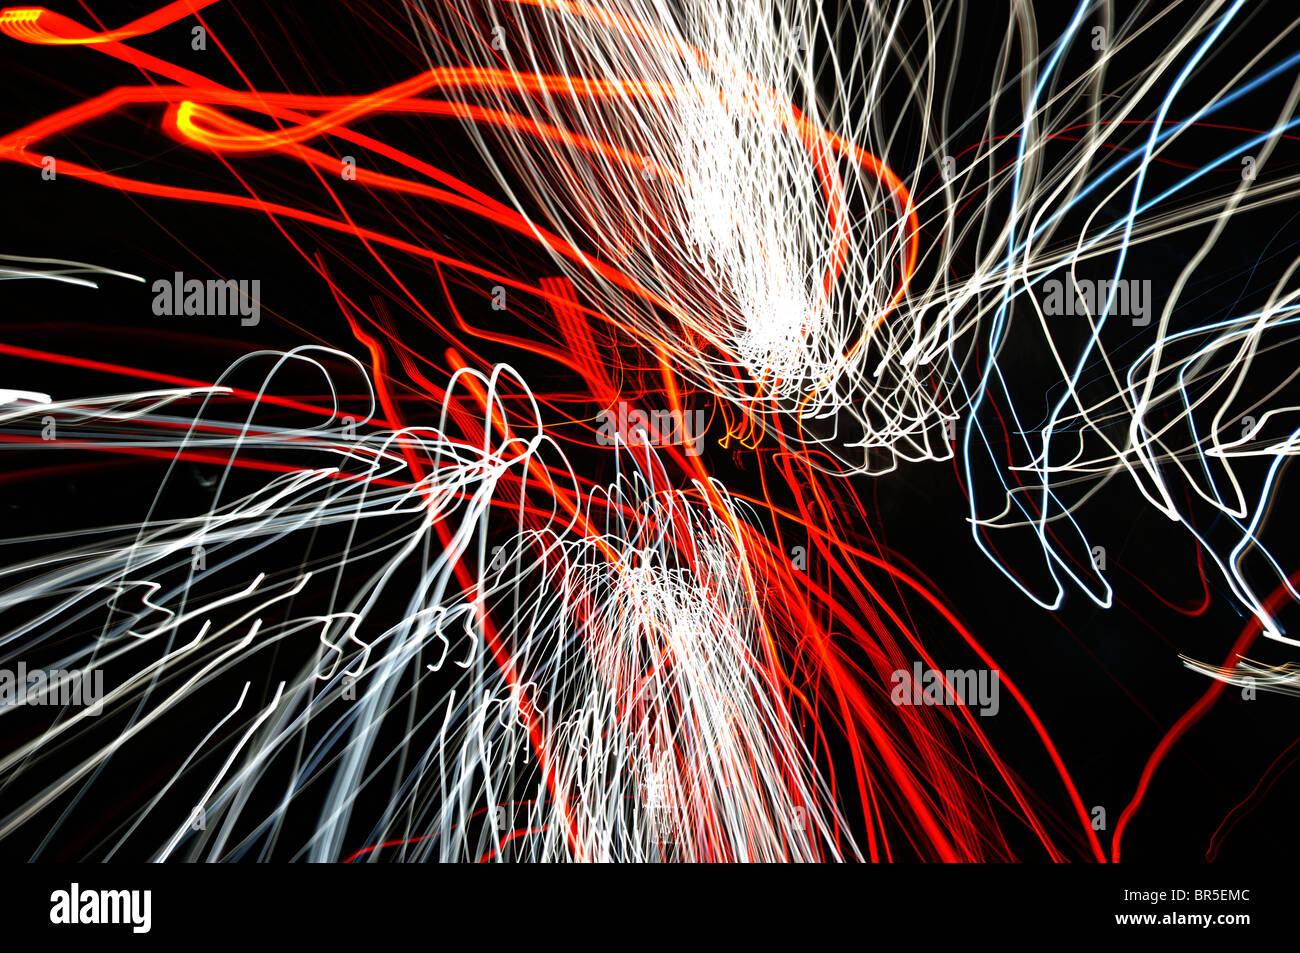 motorway,night,traffic,trail,lights,cars,fast,moving,blur,speed,flow,bright,movement,abstract,design,lines,zoom,electric,lights, Stock Photo